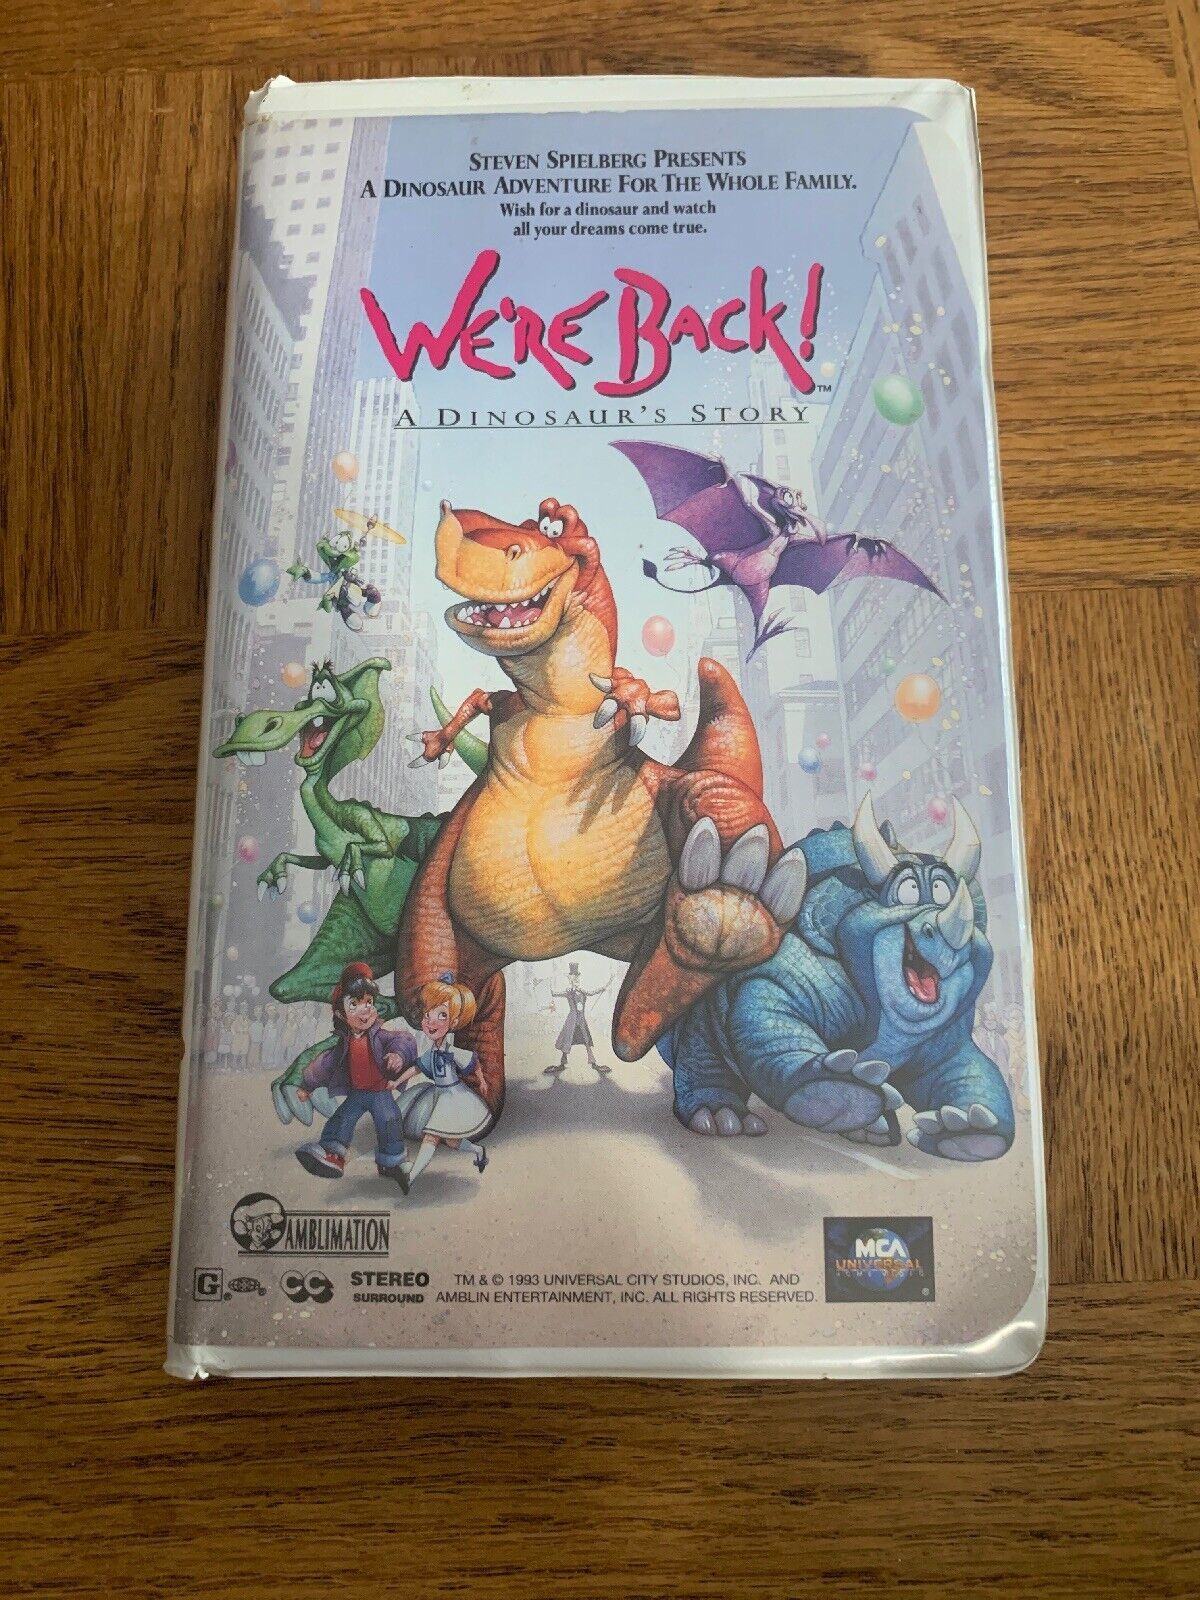 Primary image for Ein Dinosaurs Story VHS